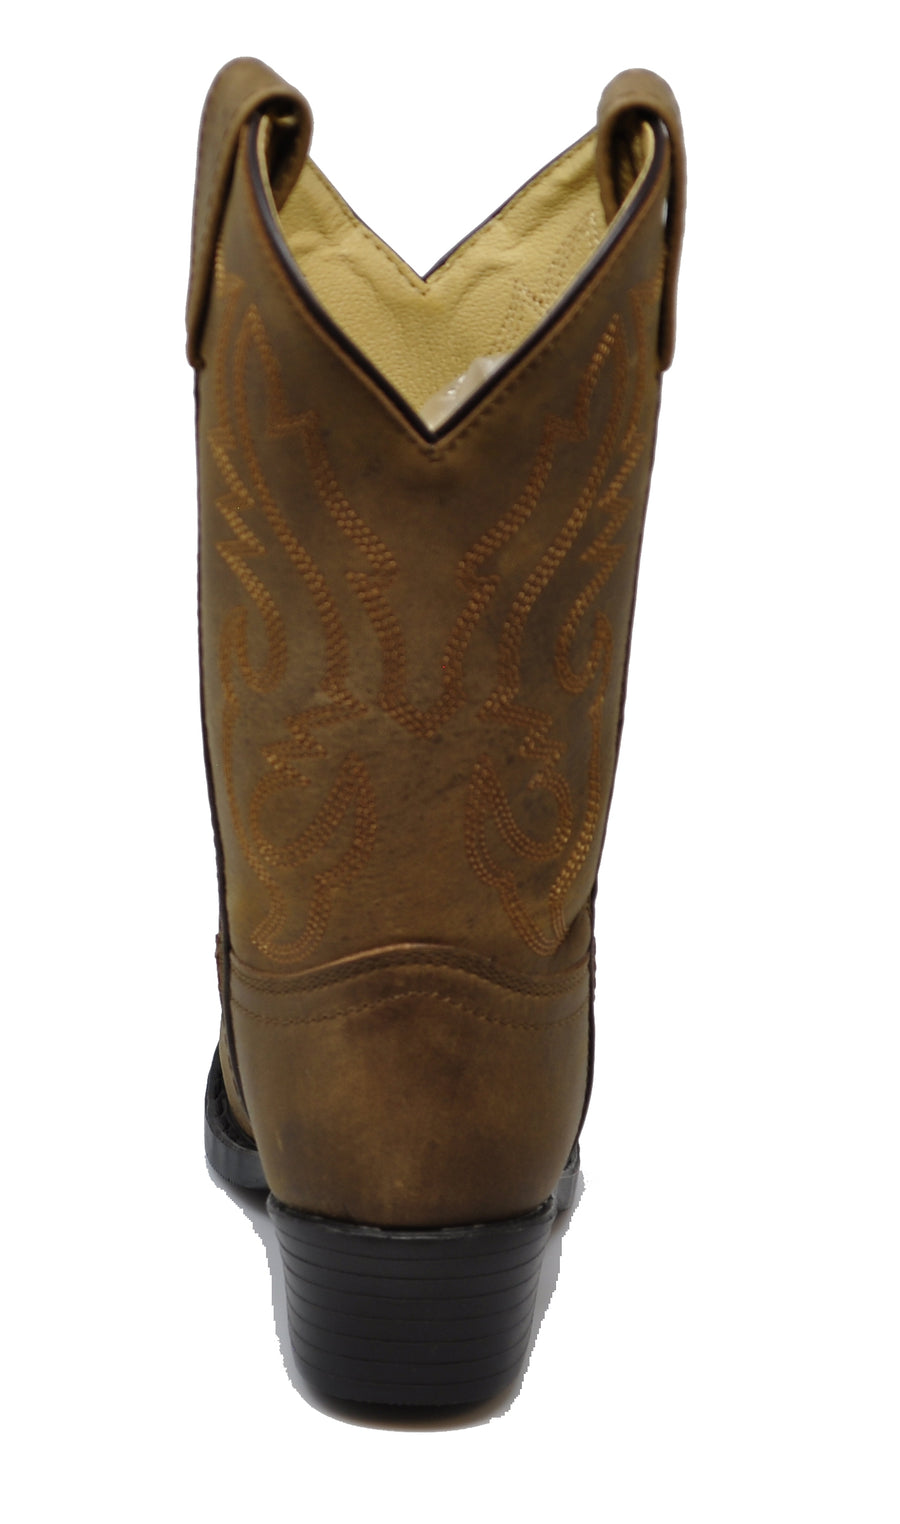 Smoky Mountain Childrens Denver Distressed Brown Leather Cowboy Boots